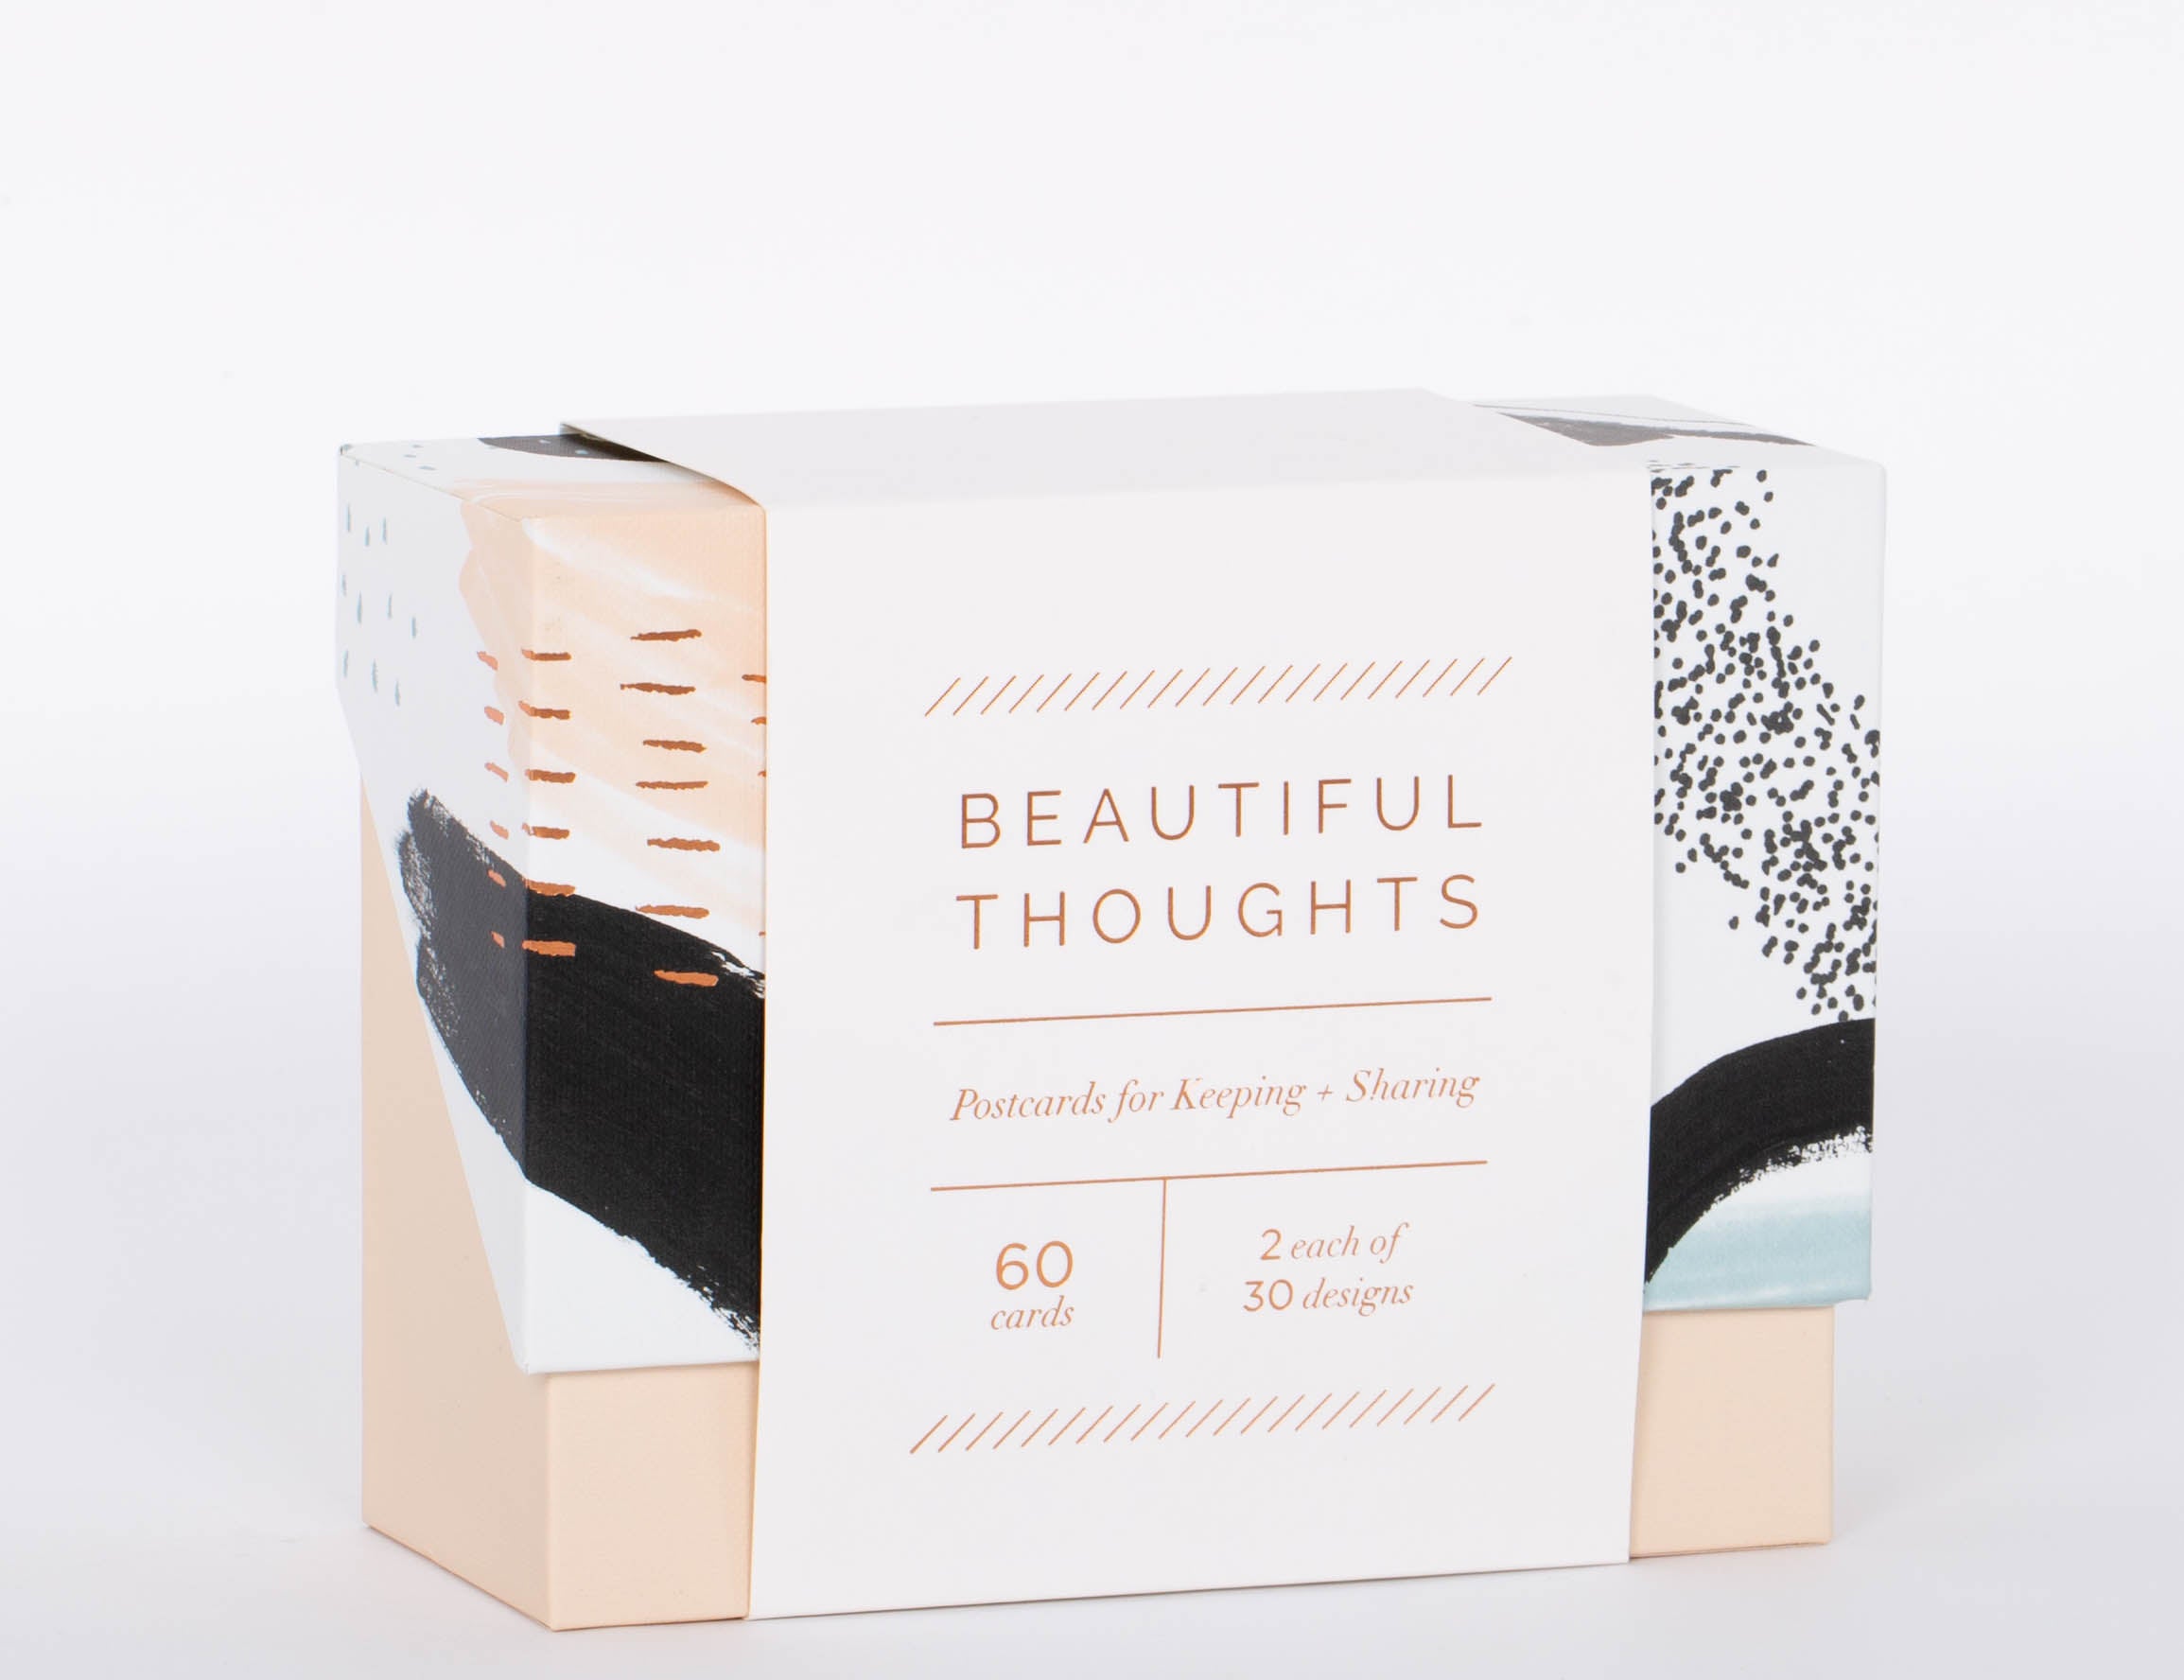 Pink, black, and white brush stroke patterned box of 60 Beautiful Thoughts Postcards by Compendium. White background.